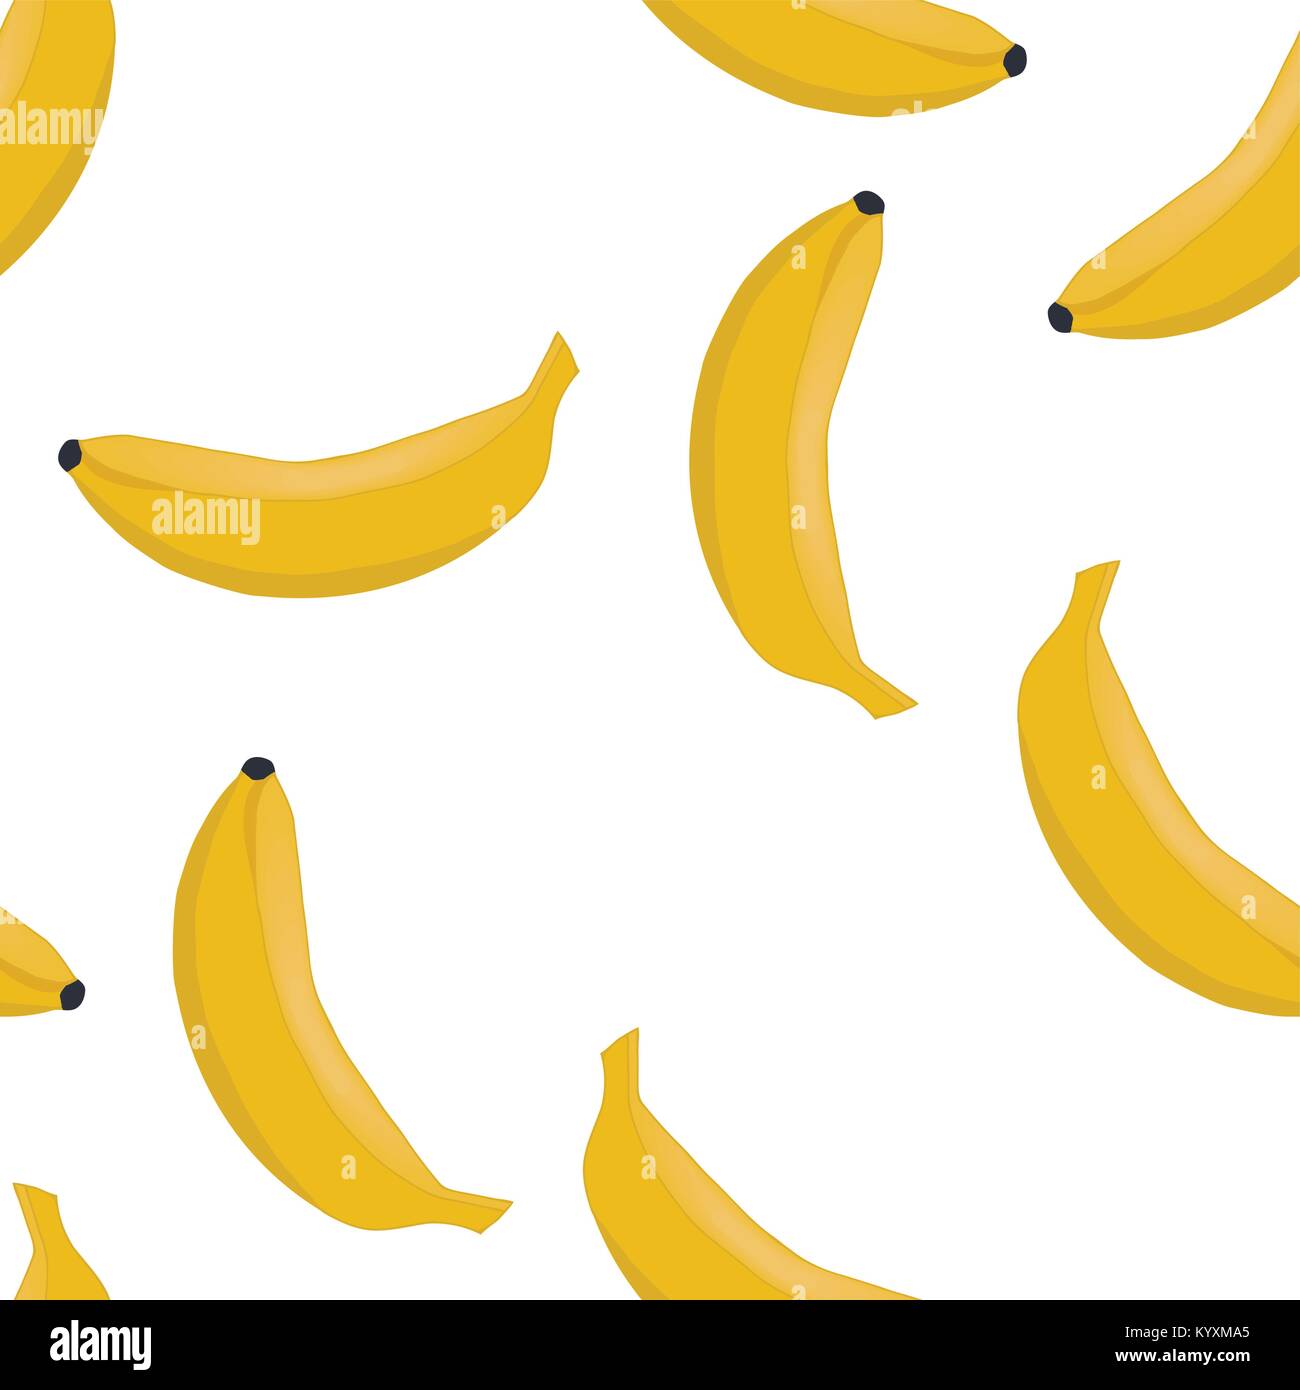 Seamless pattern with ripe bananas. Stock Vector